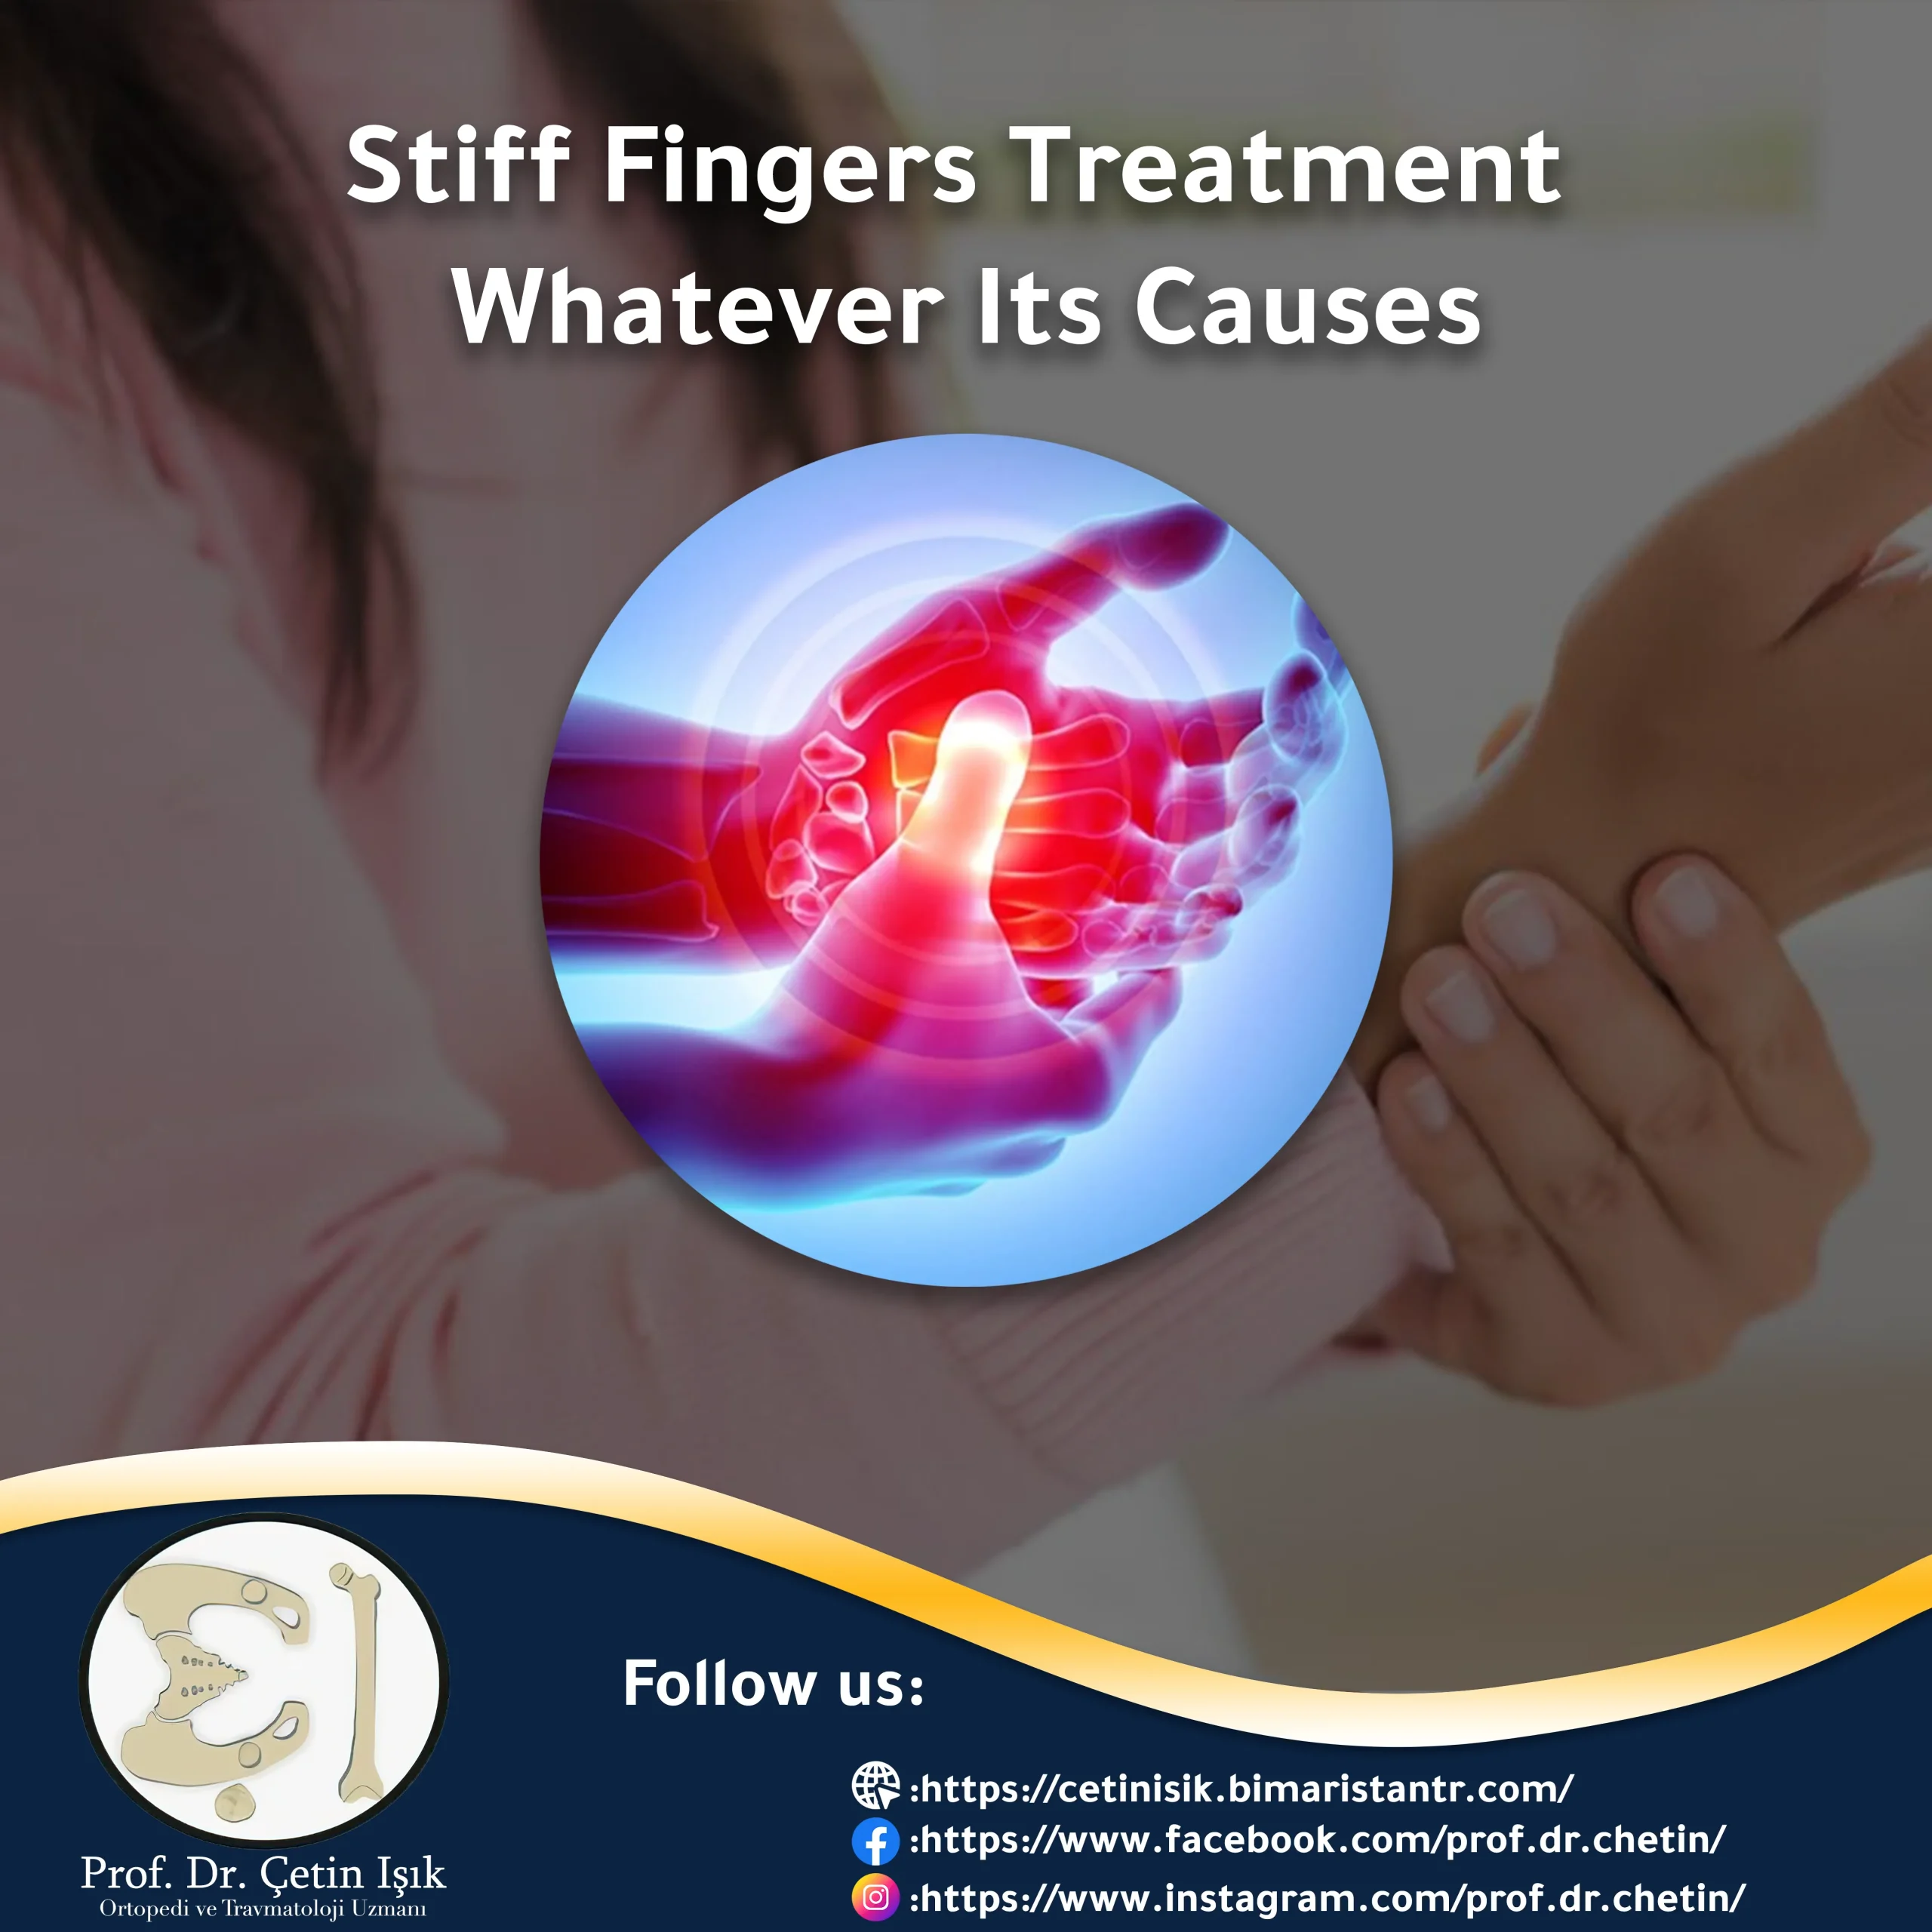 Stiff Fingers Treatment Whatever Its Causes